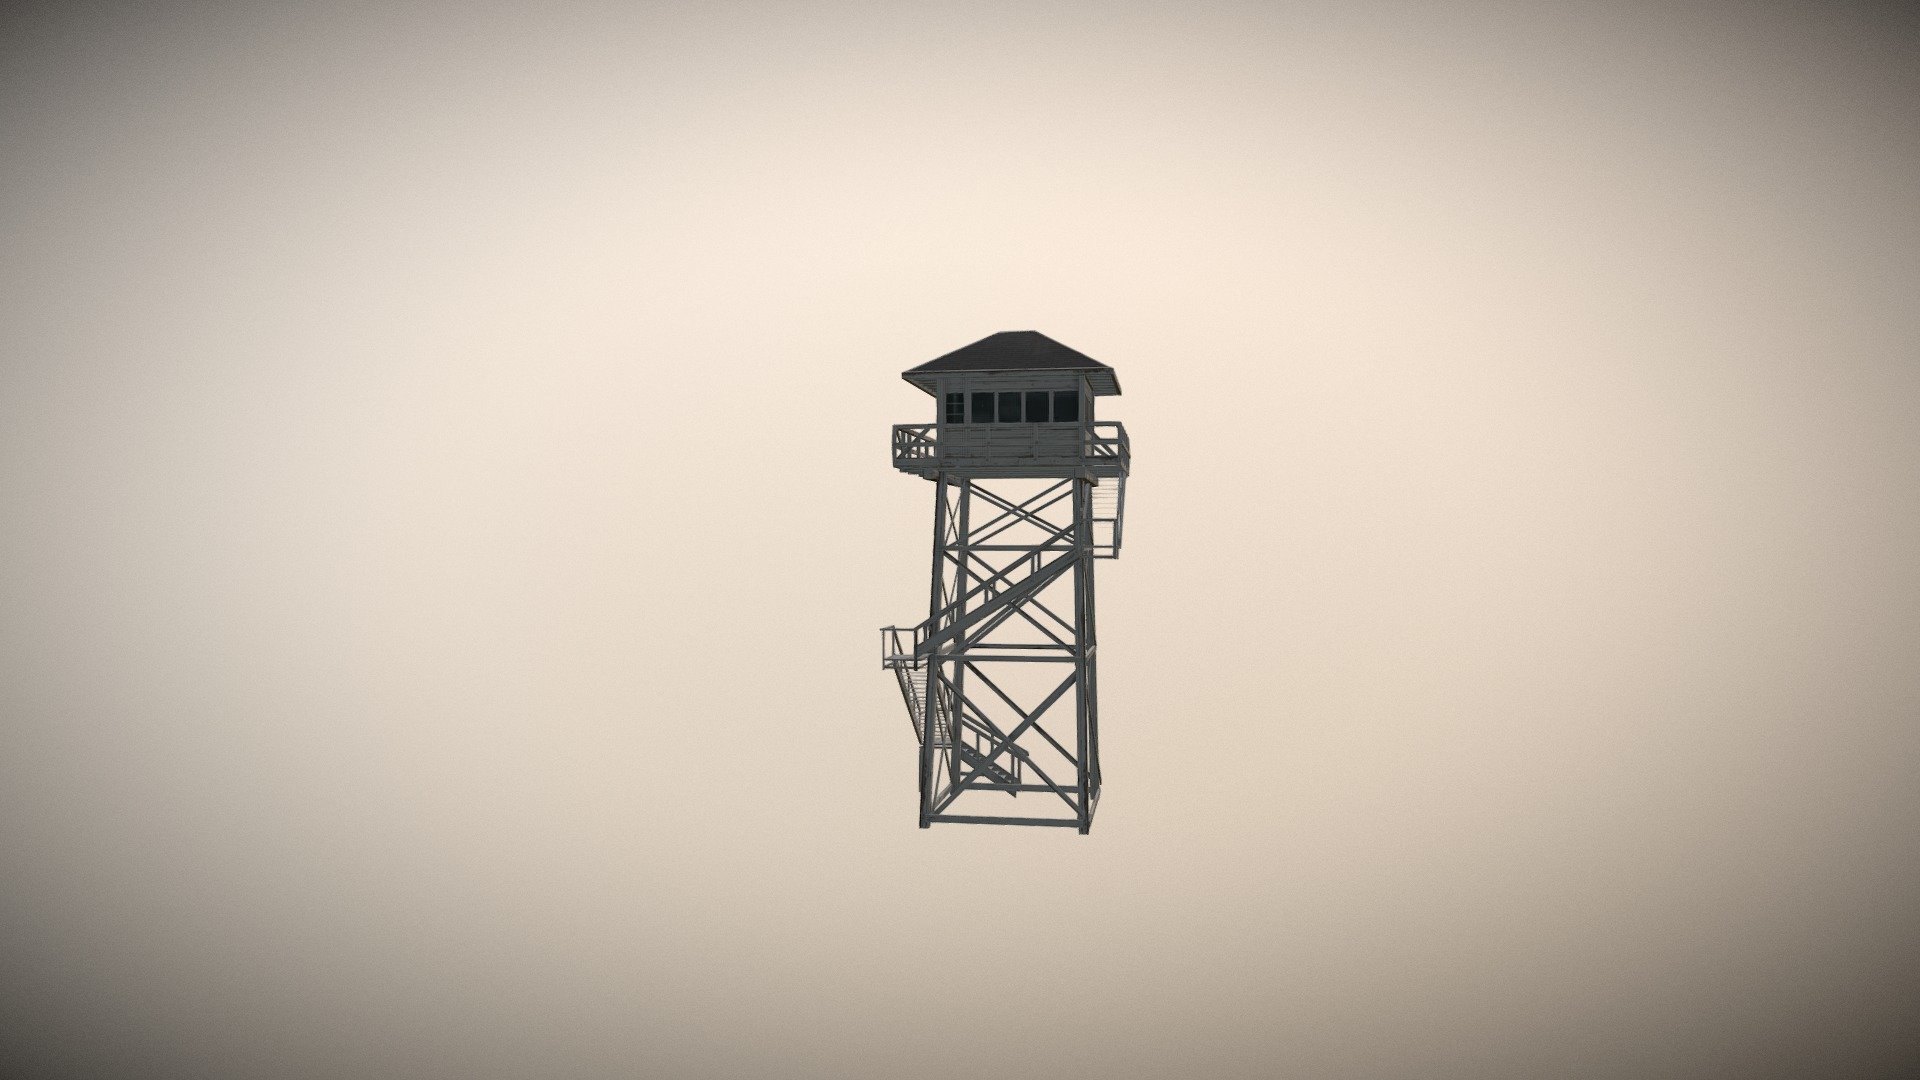 A forest fire lookout tower that you could find in the US forests back in the day, inspired upon the tower from the Firewatch game

Modeled from scratch, kept an eye on the polycount as its supposed to be a small building for Cities:Skylines

512x1024 textures. textured in adobe photoshop and modeled in Autodesk Maya 2016 - Fire lookout tower - 3D model by Evangeline (@EvametryE) 3d model